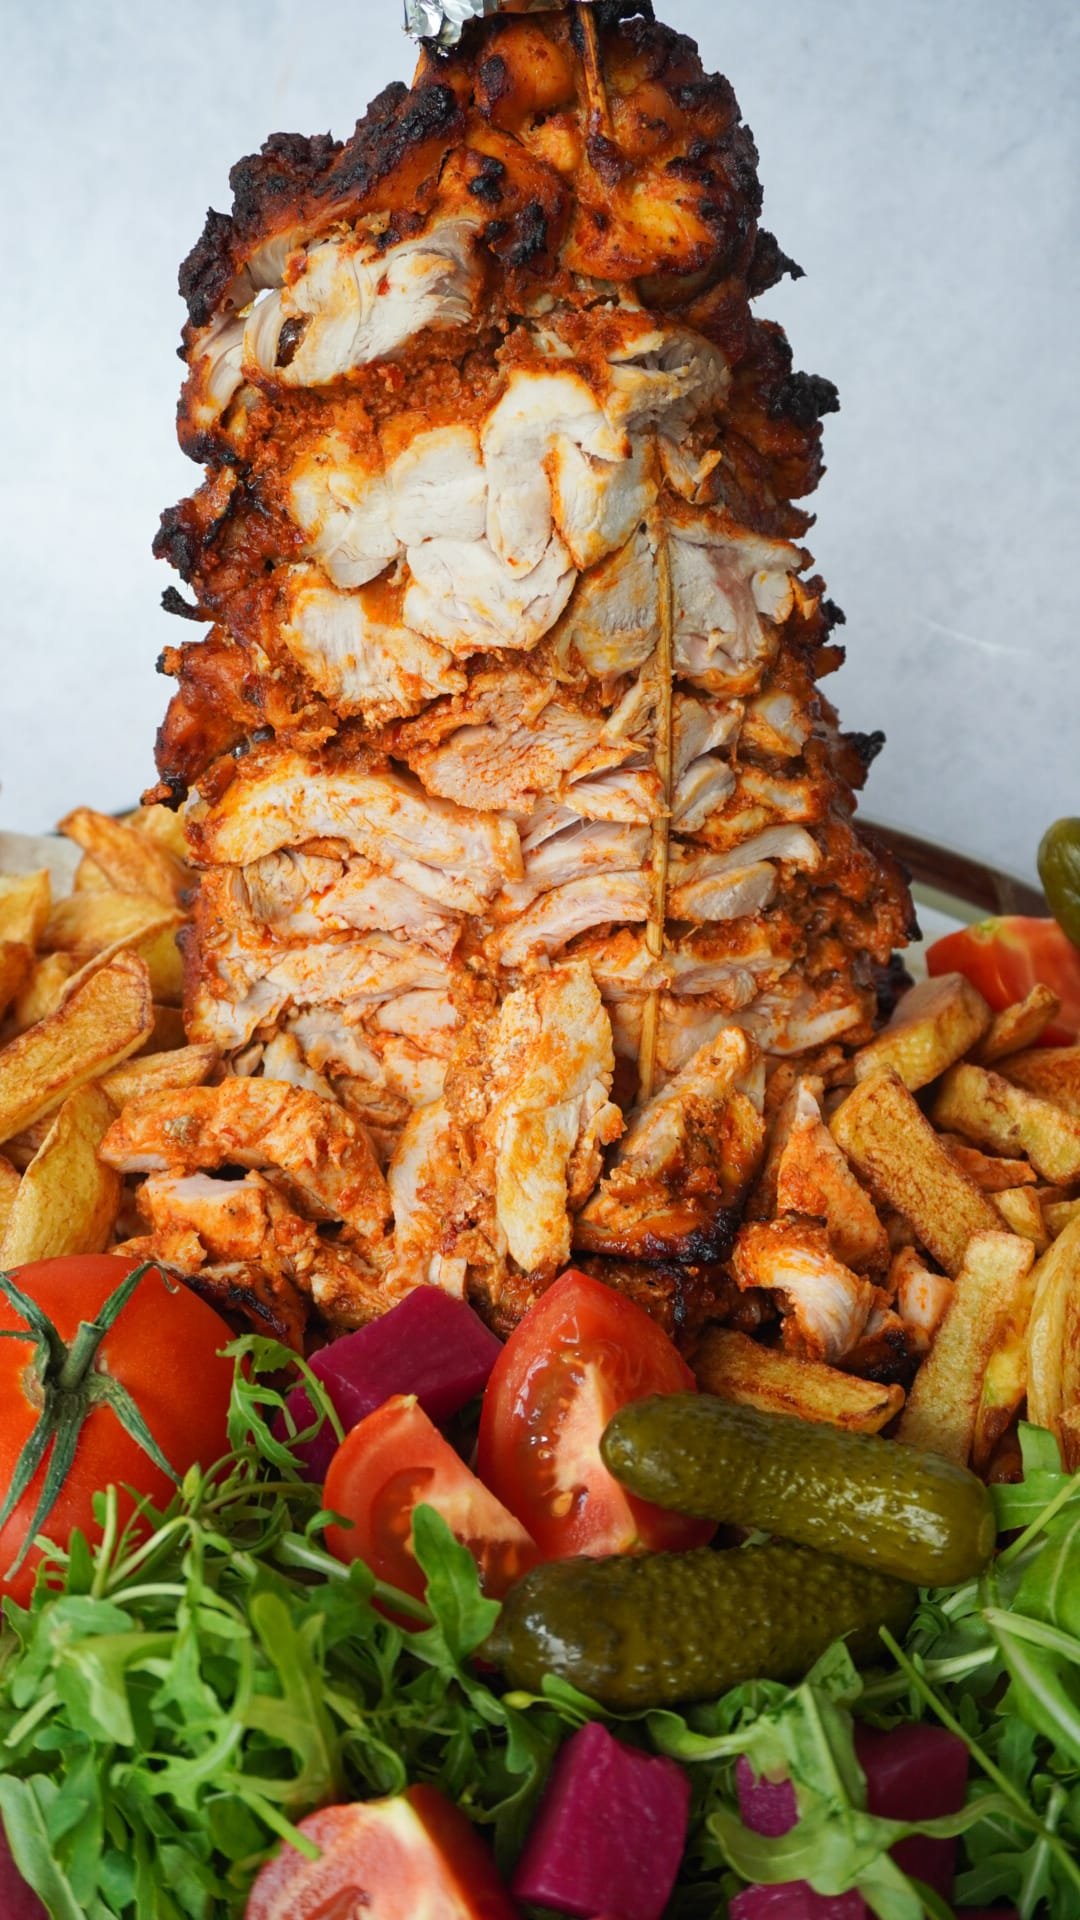 An absolute masterpiece, this Chicken Tavuk Doner with Chips recipe is a show stopper.